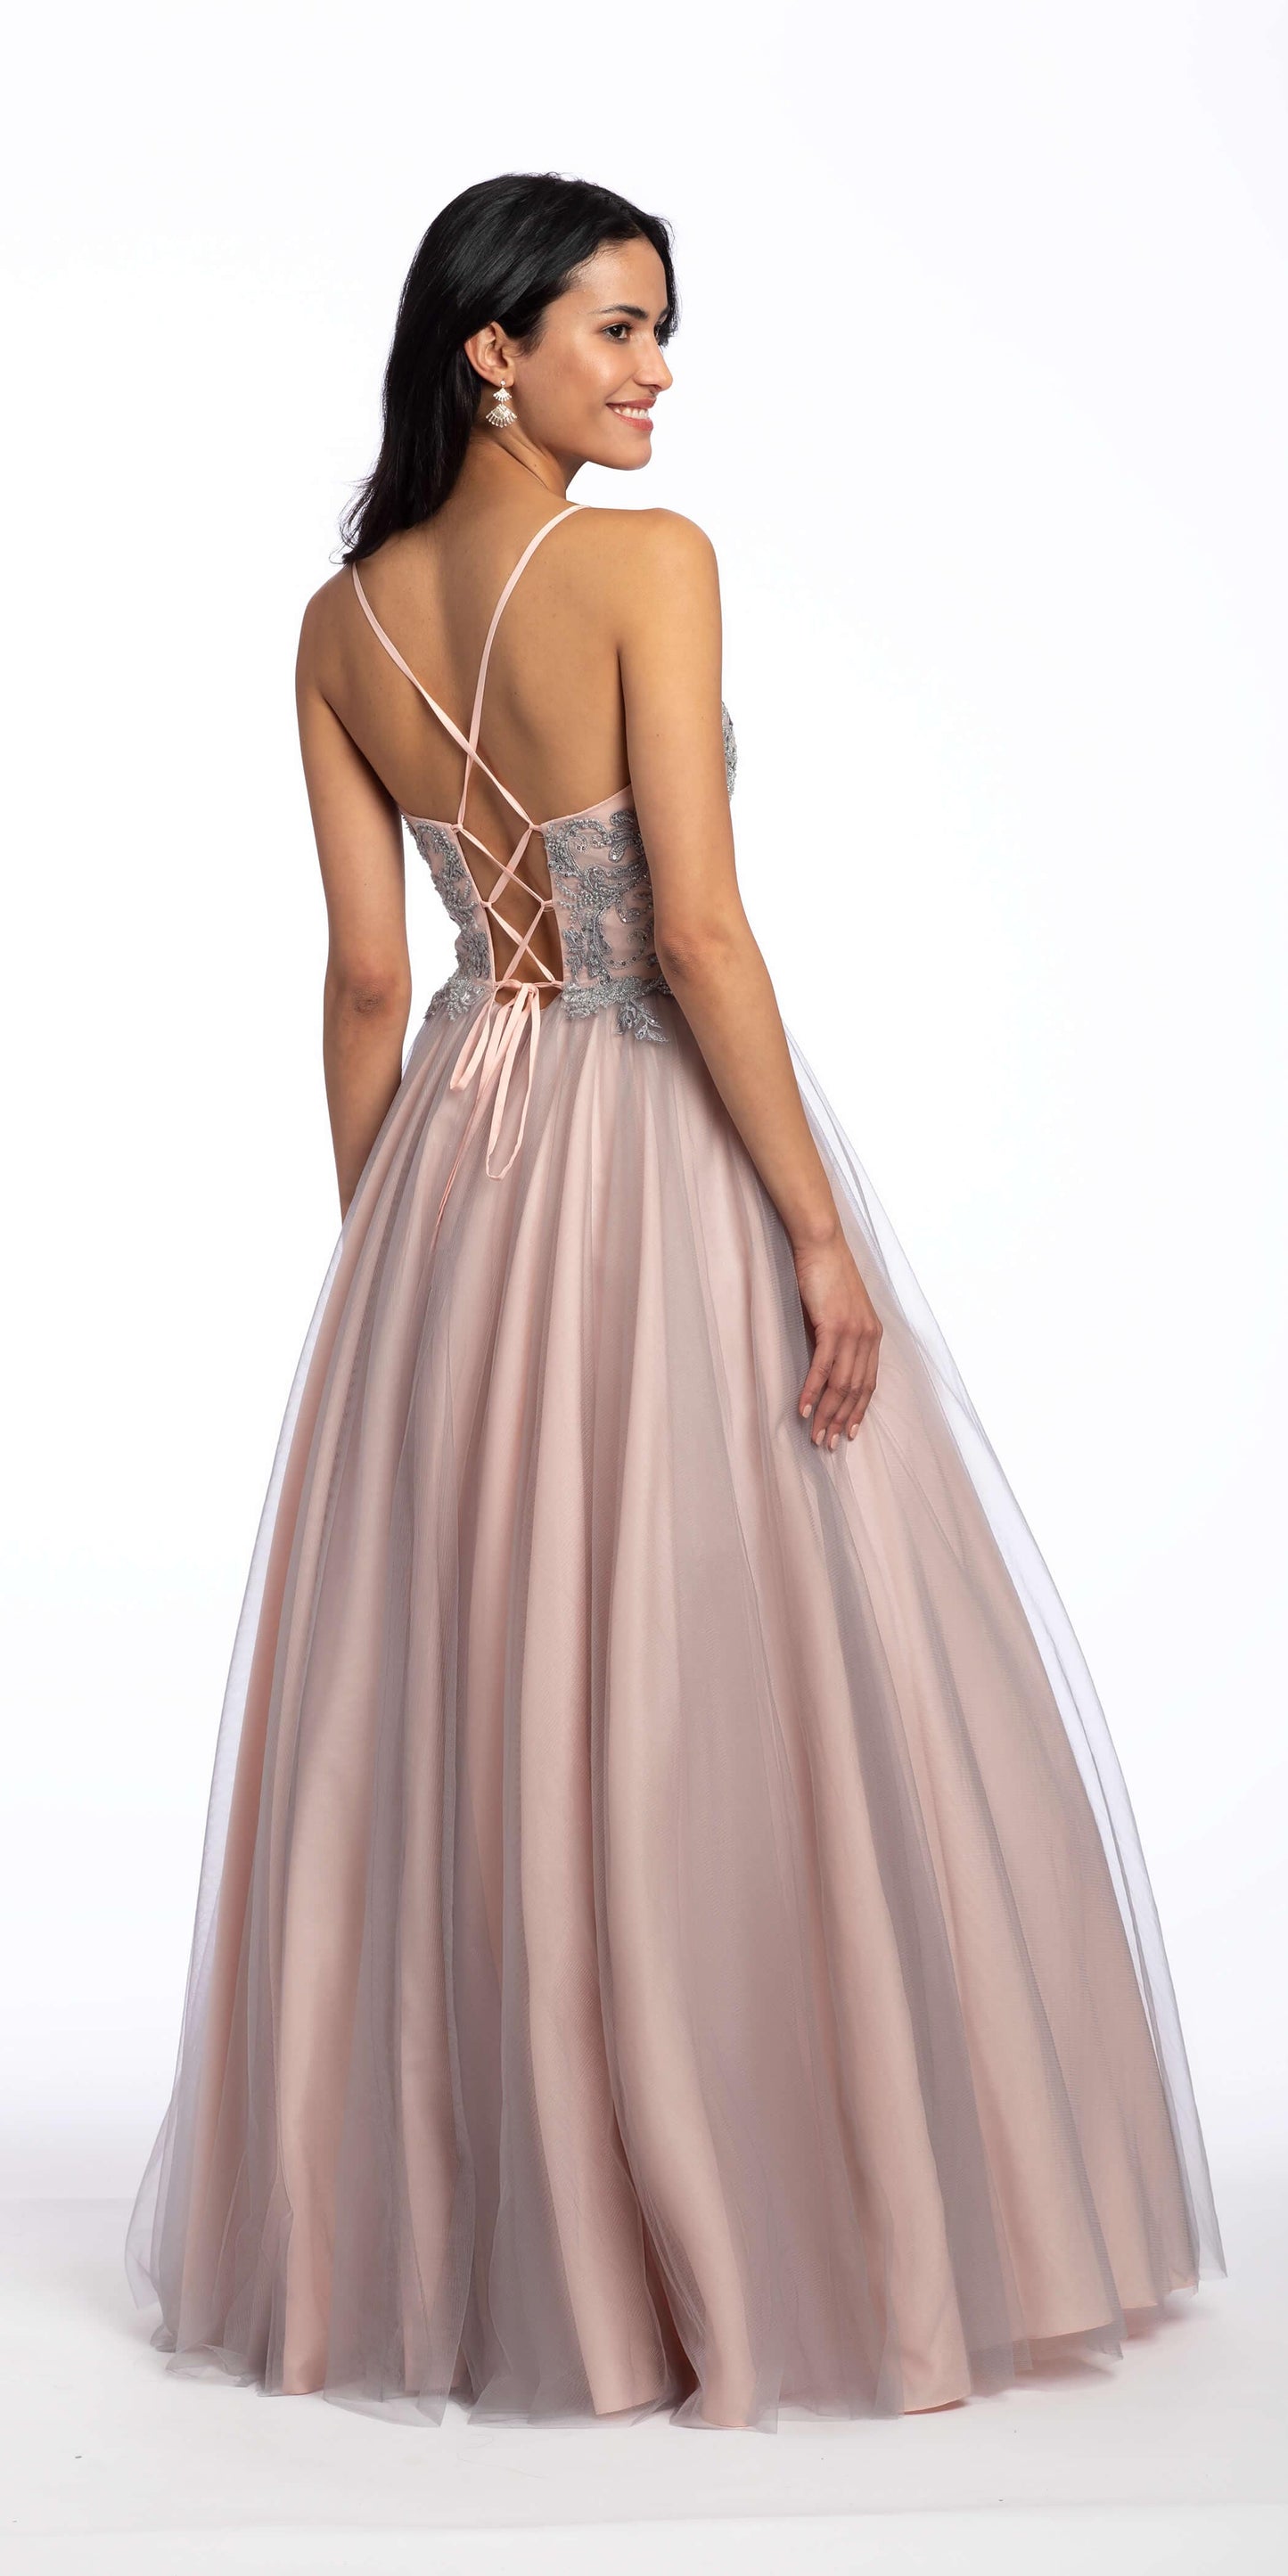 Camille La Vie Two Tone Embellished Lace Up Back Mesh Ballgown